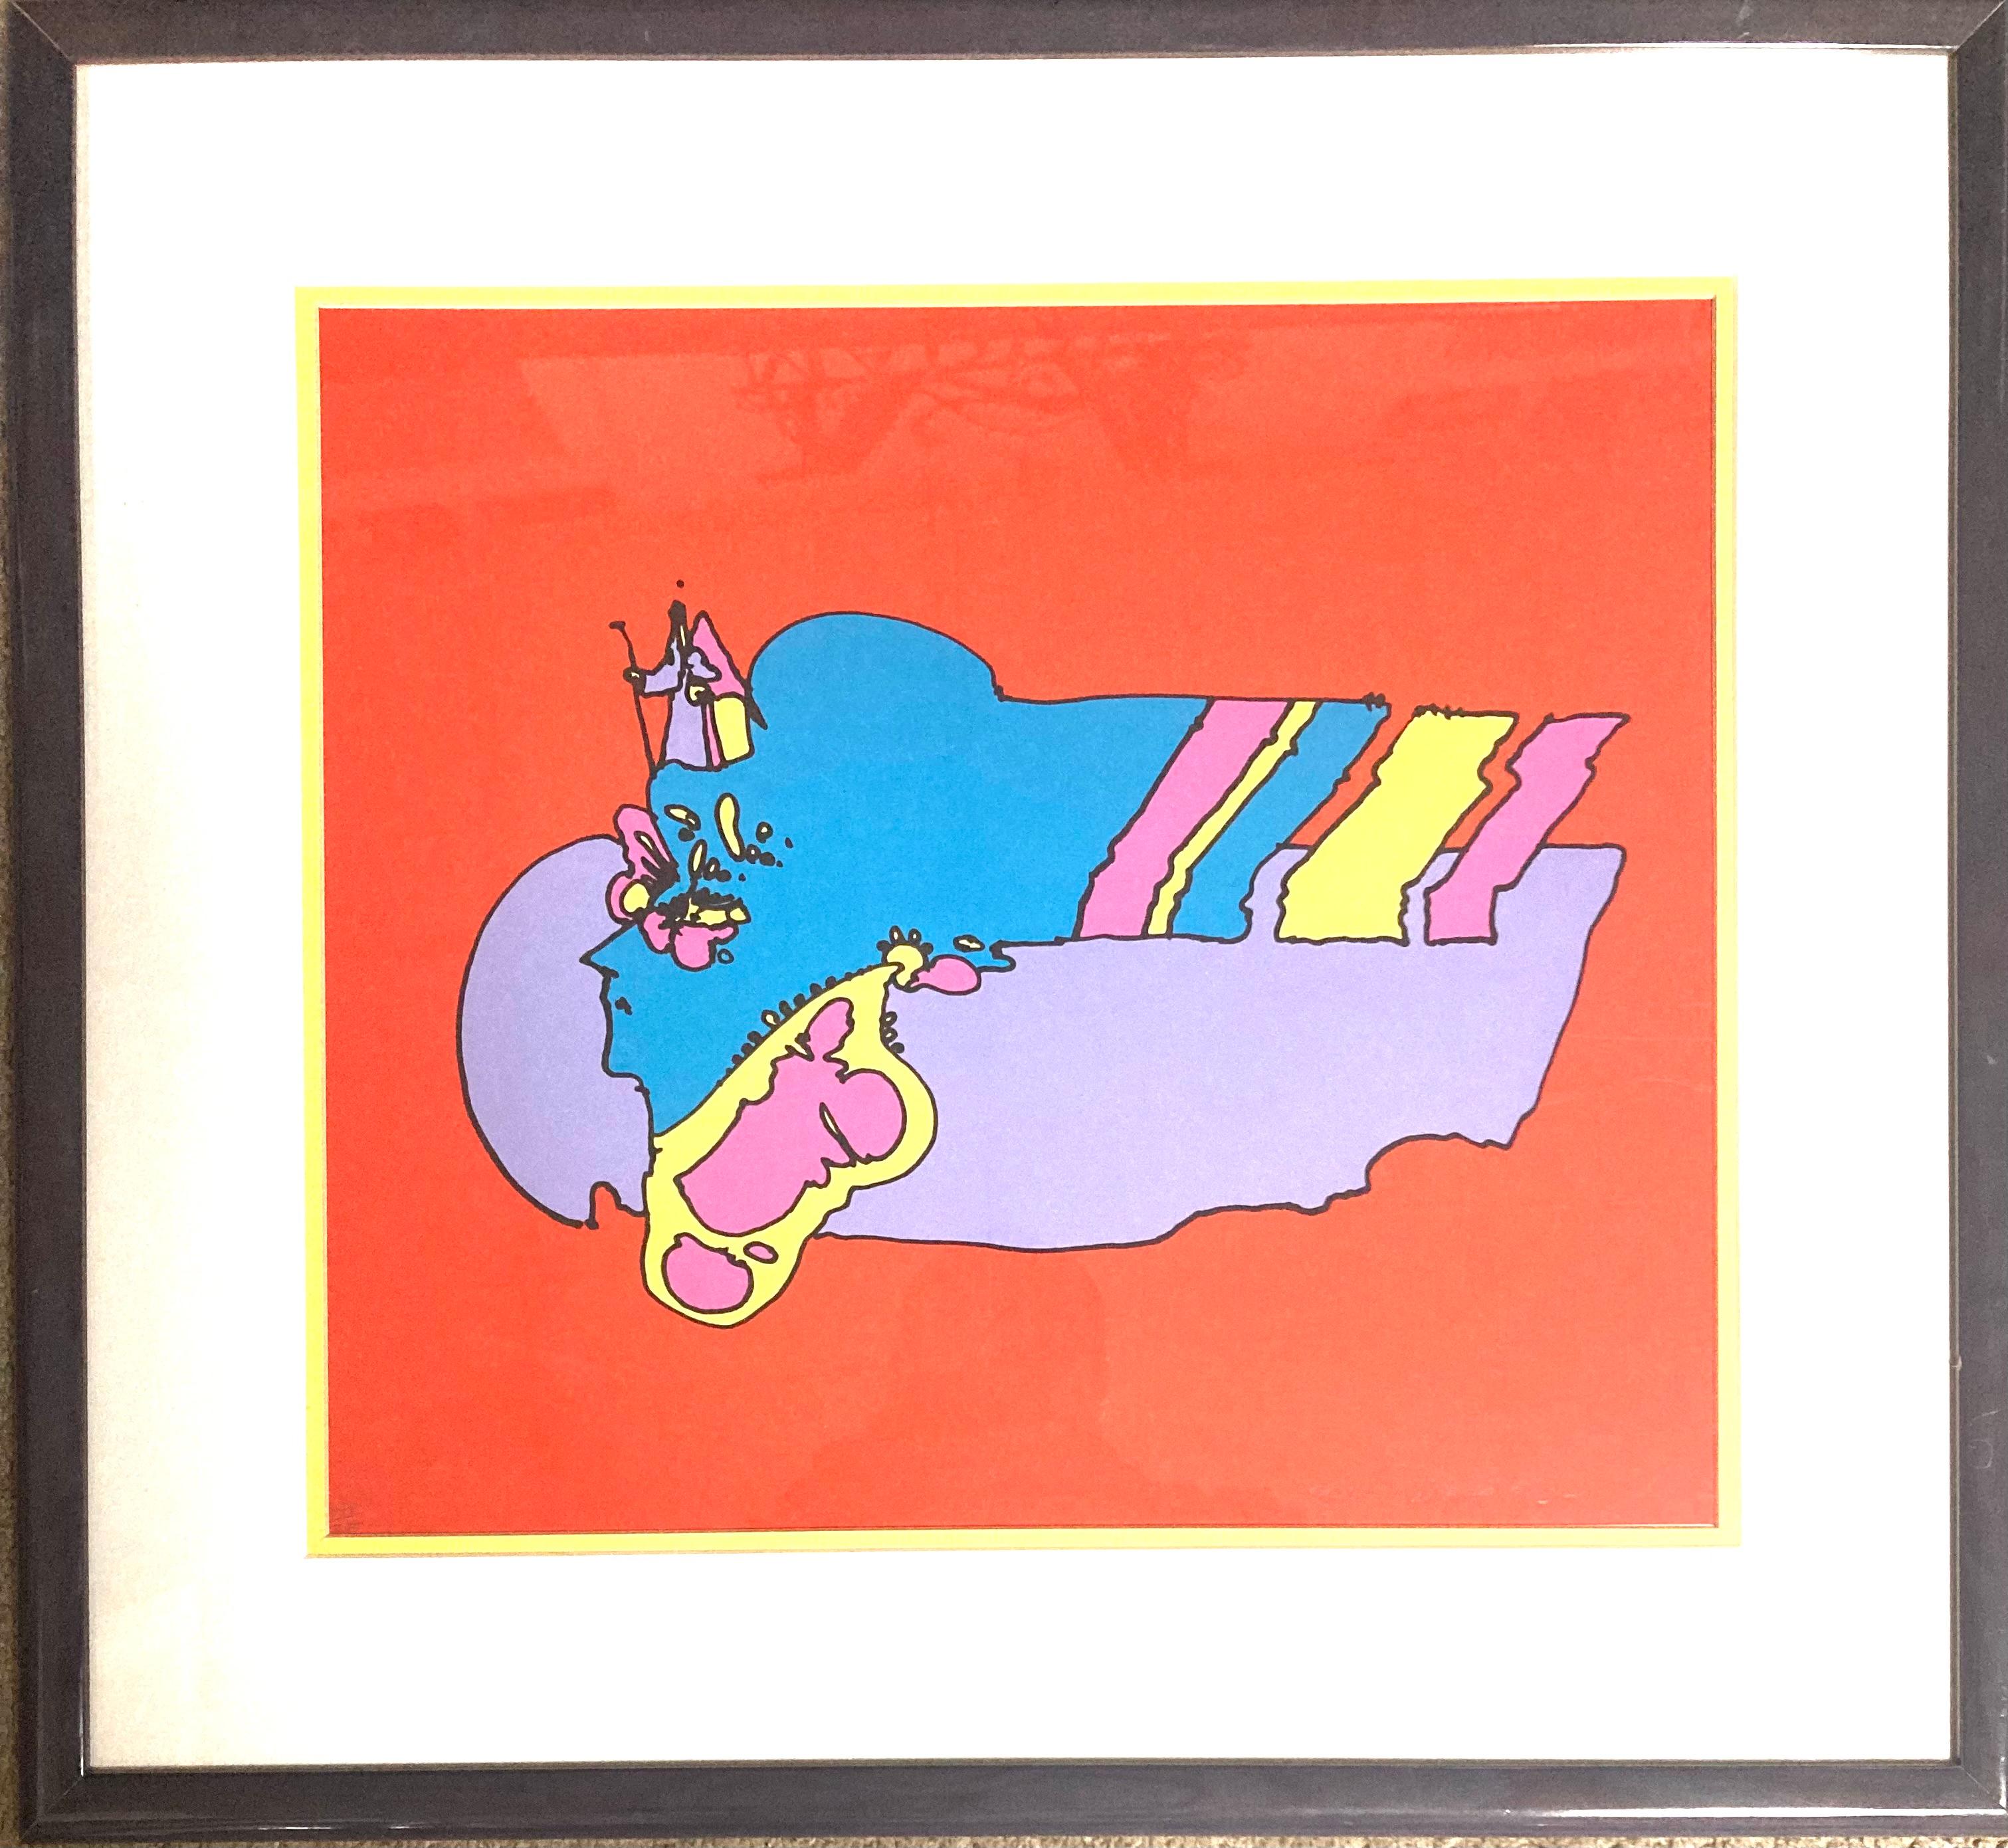 “Remembering the flight” - Print by Peter Max